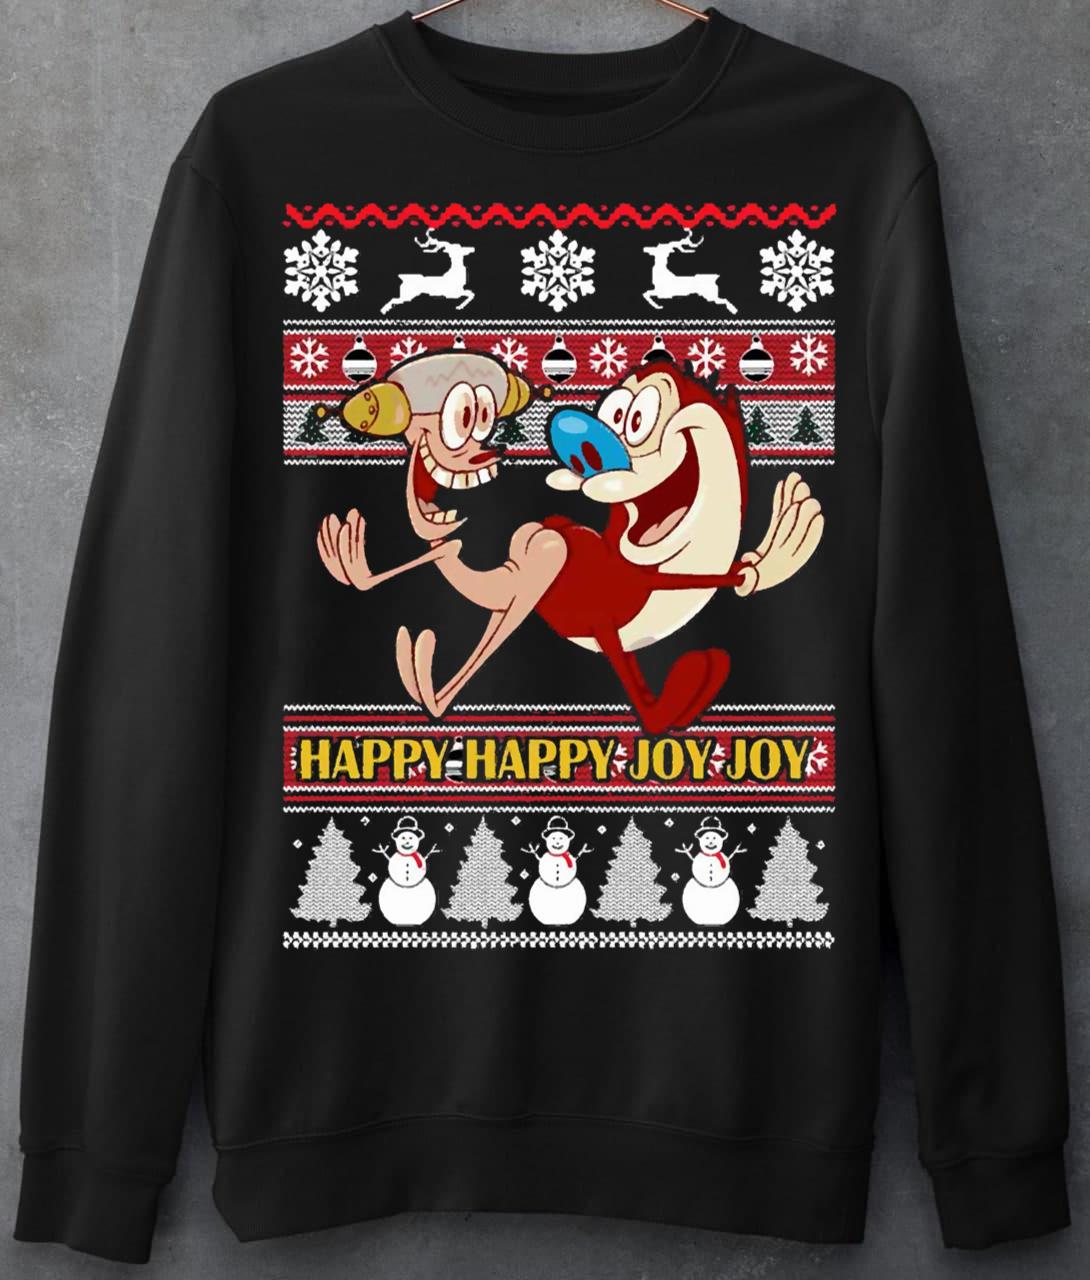 Ren and Stimpy Happy Christmas T-Shirt